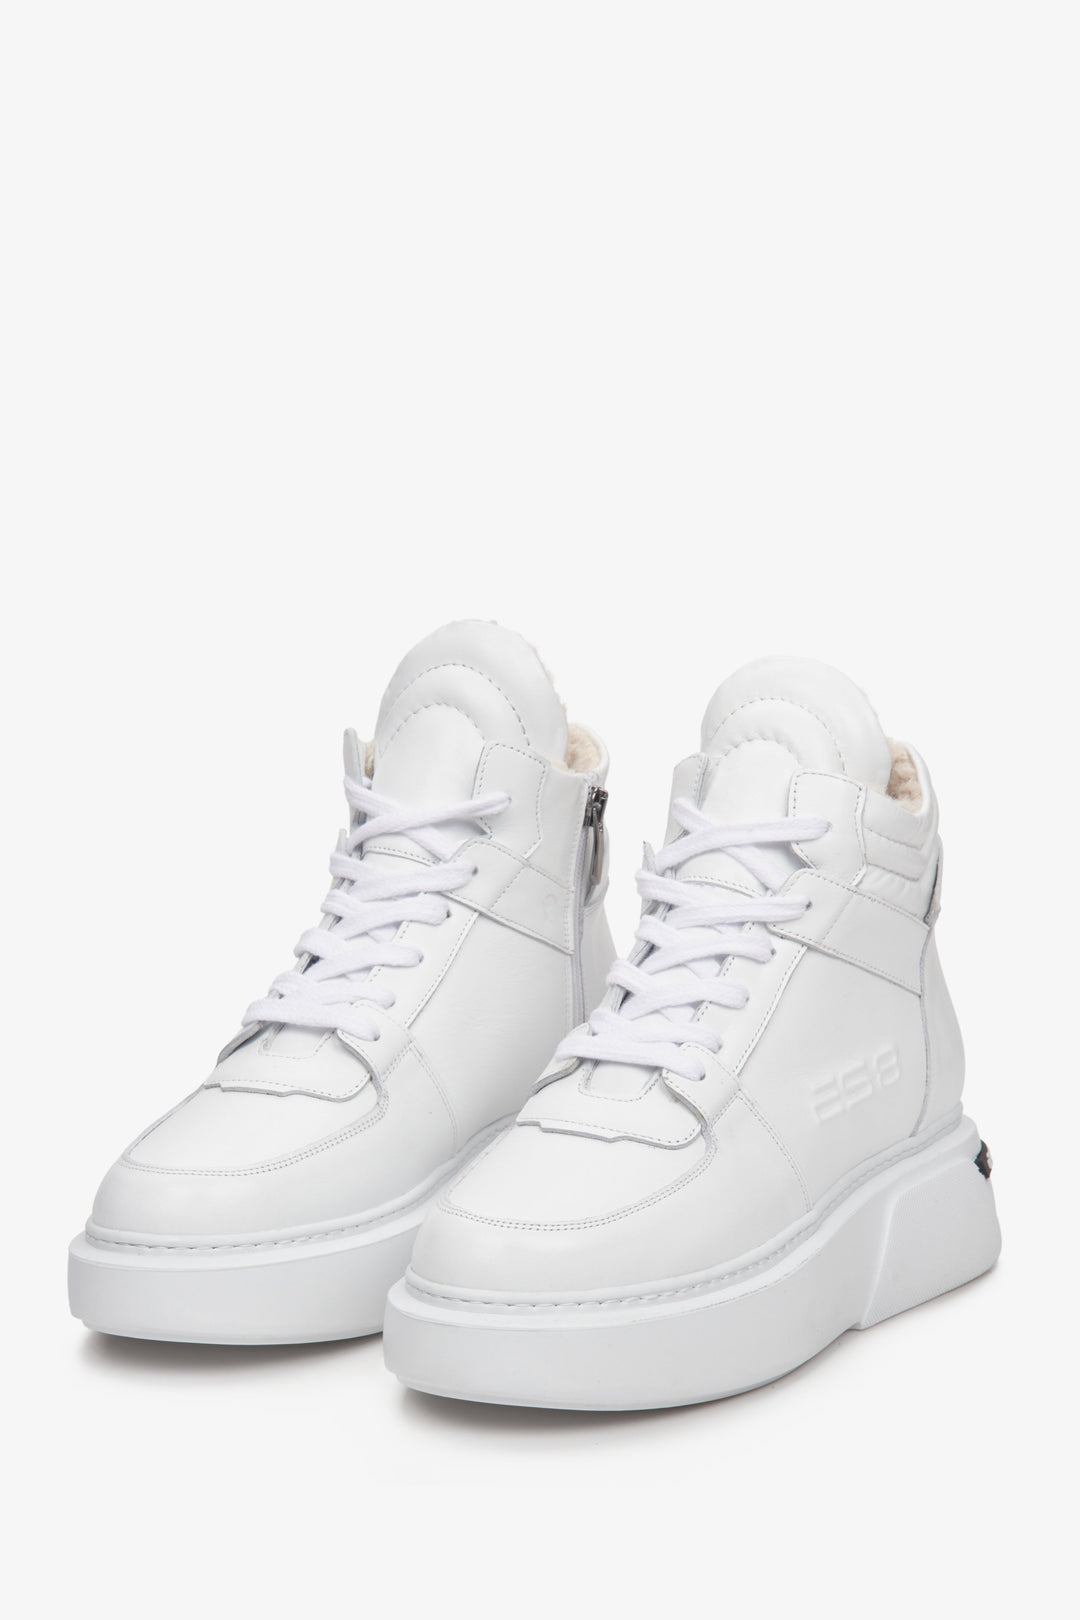 White, high-top women's winter sneakers made of suede and genuine leather by Estro.